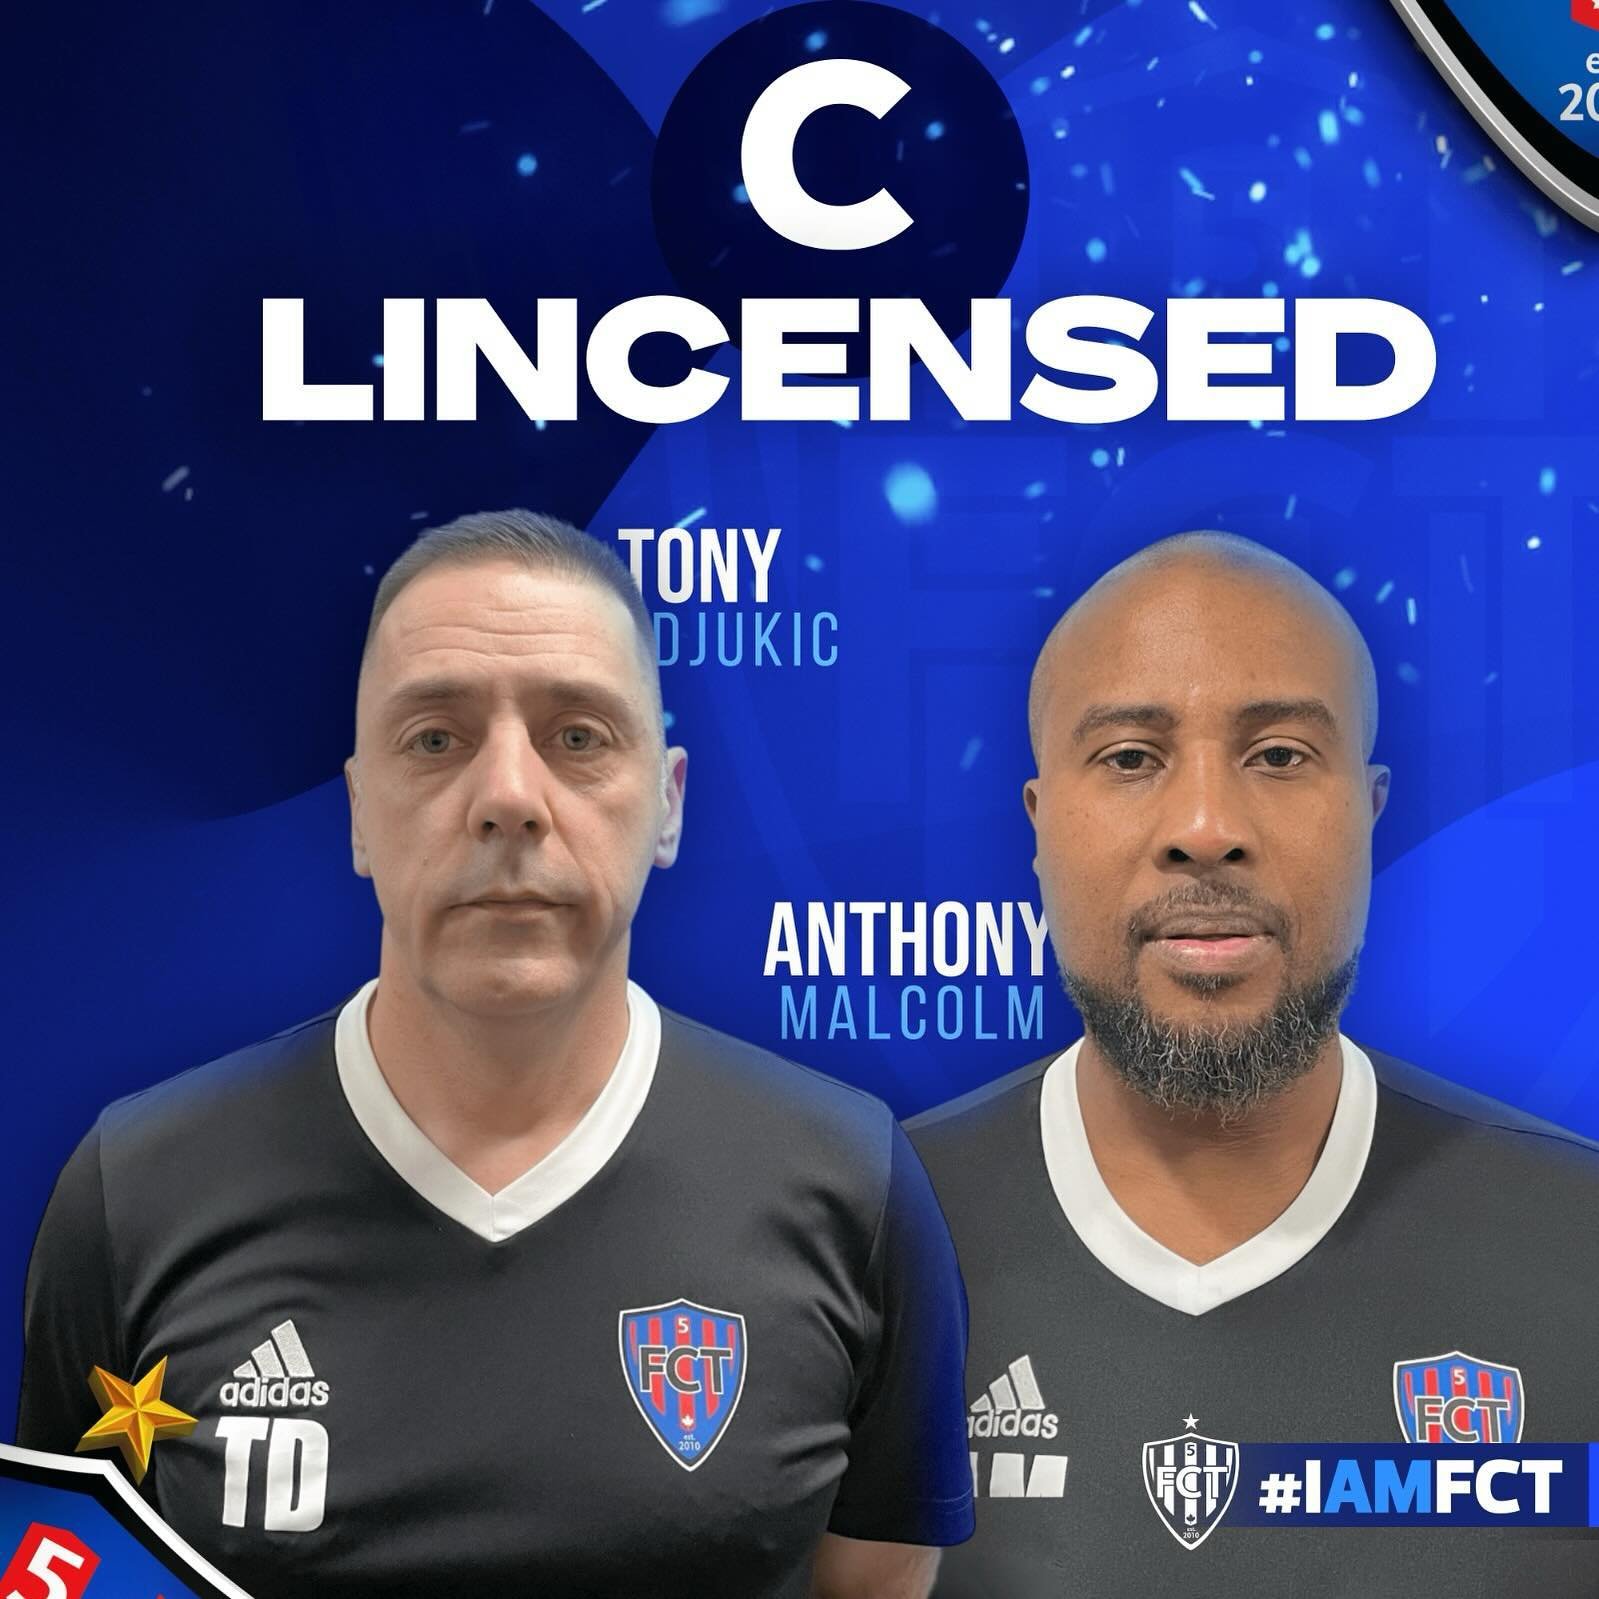 Congrats to two of our Club Coaches as they most recently obtained their C Licenses through @ontario_soccer. Well done gentlemen. Honoured to have you with us ! 💪🏽💪🏽

Anthony Malcom - U11/12 Head Coach - Grassroots Technical Director
Tony Djukic 